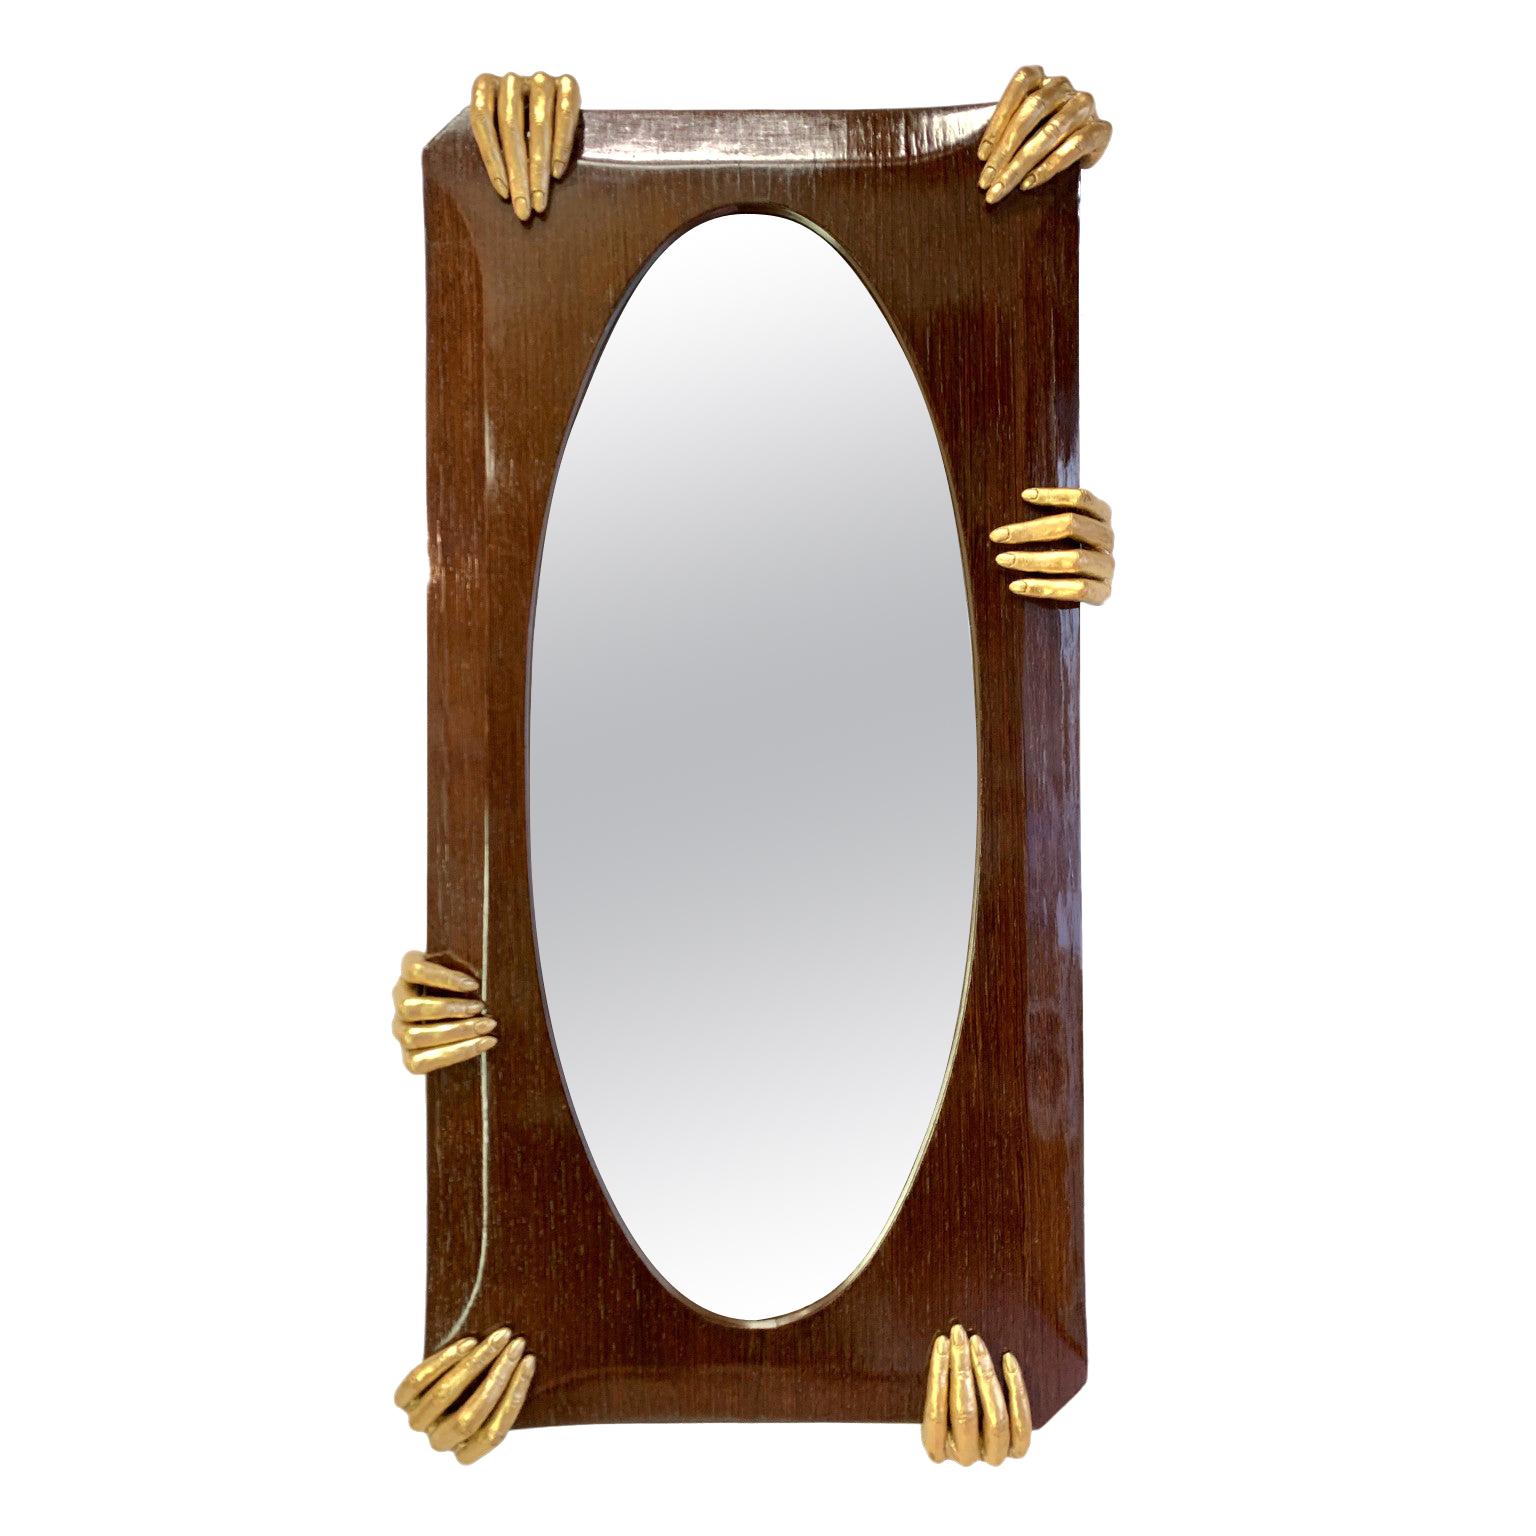 One of a Kind Italian Midcentury Wall Mirror Held by Six Hands Sculptures For Sale